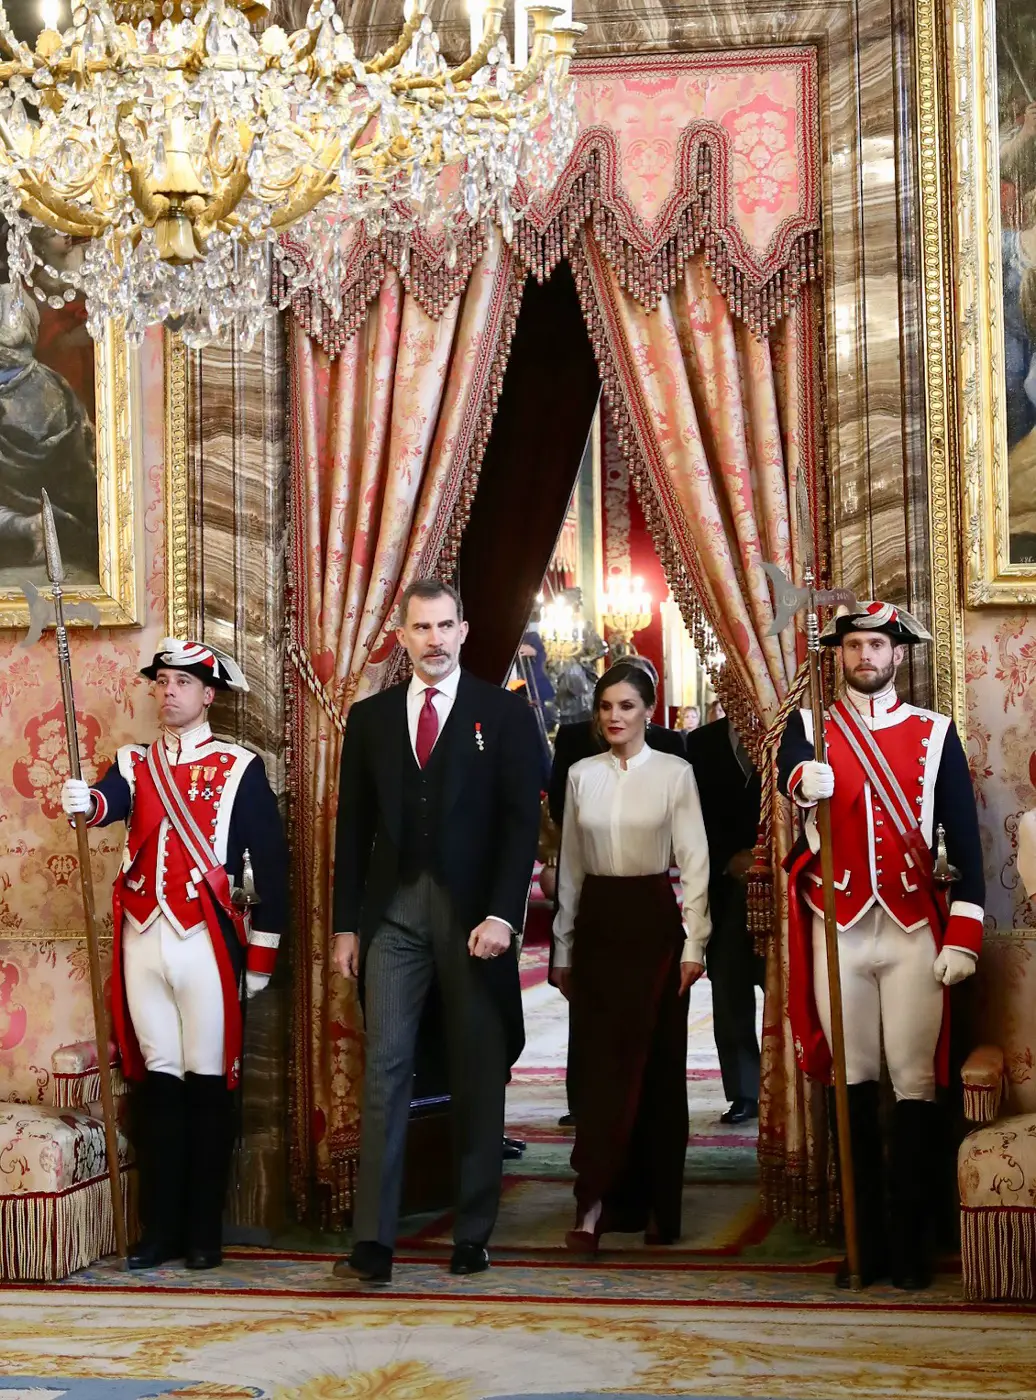 Queen Letizia of Spain in red and white for annual Diplomatic Reception in 2019